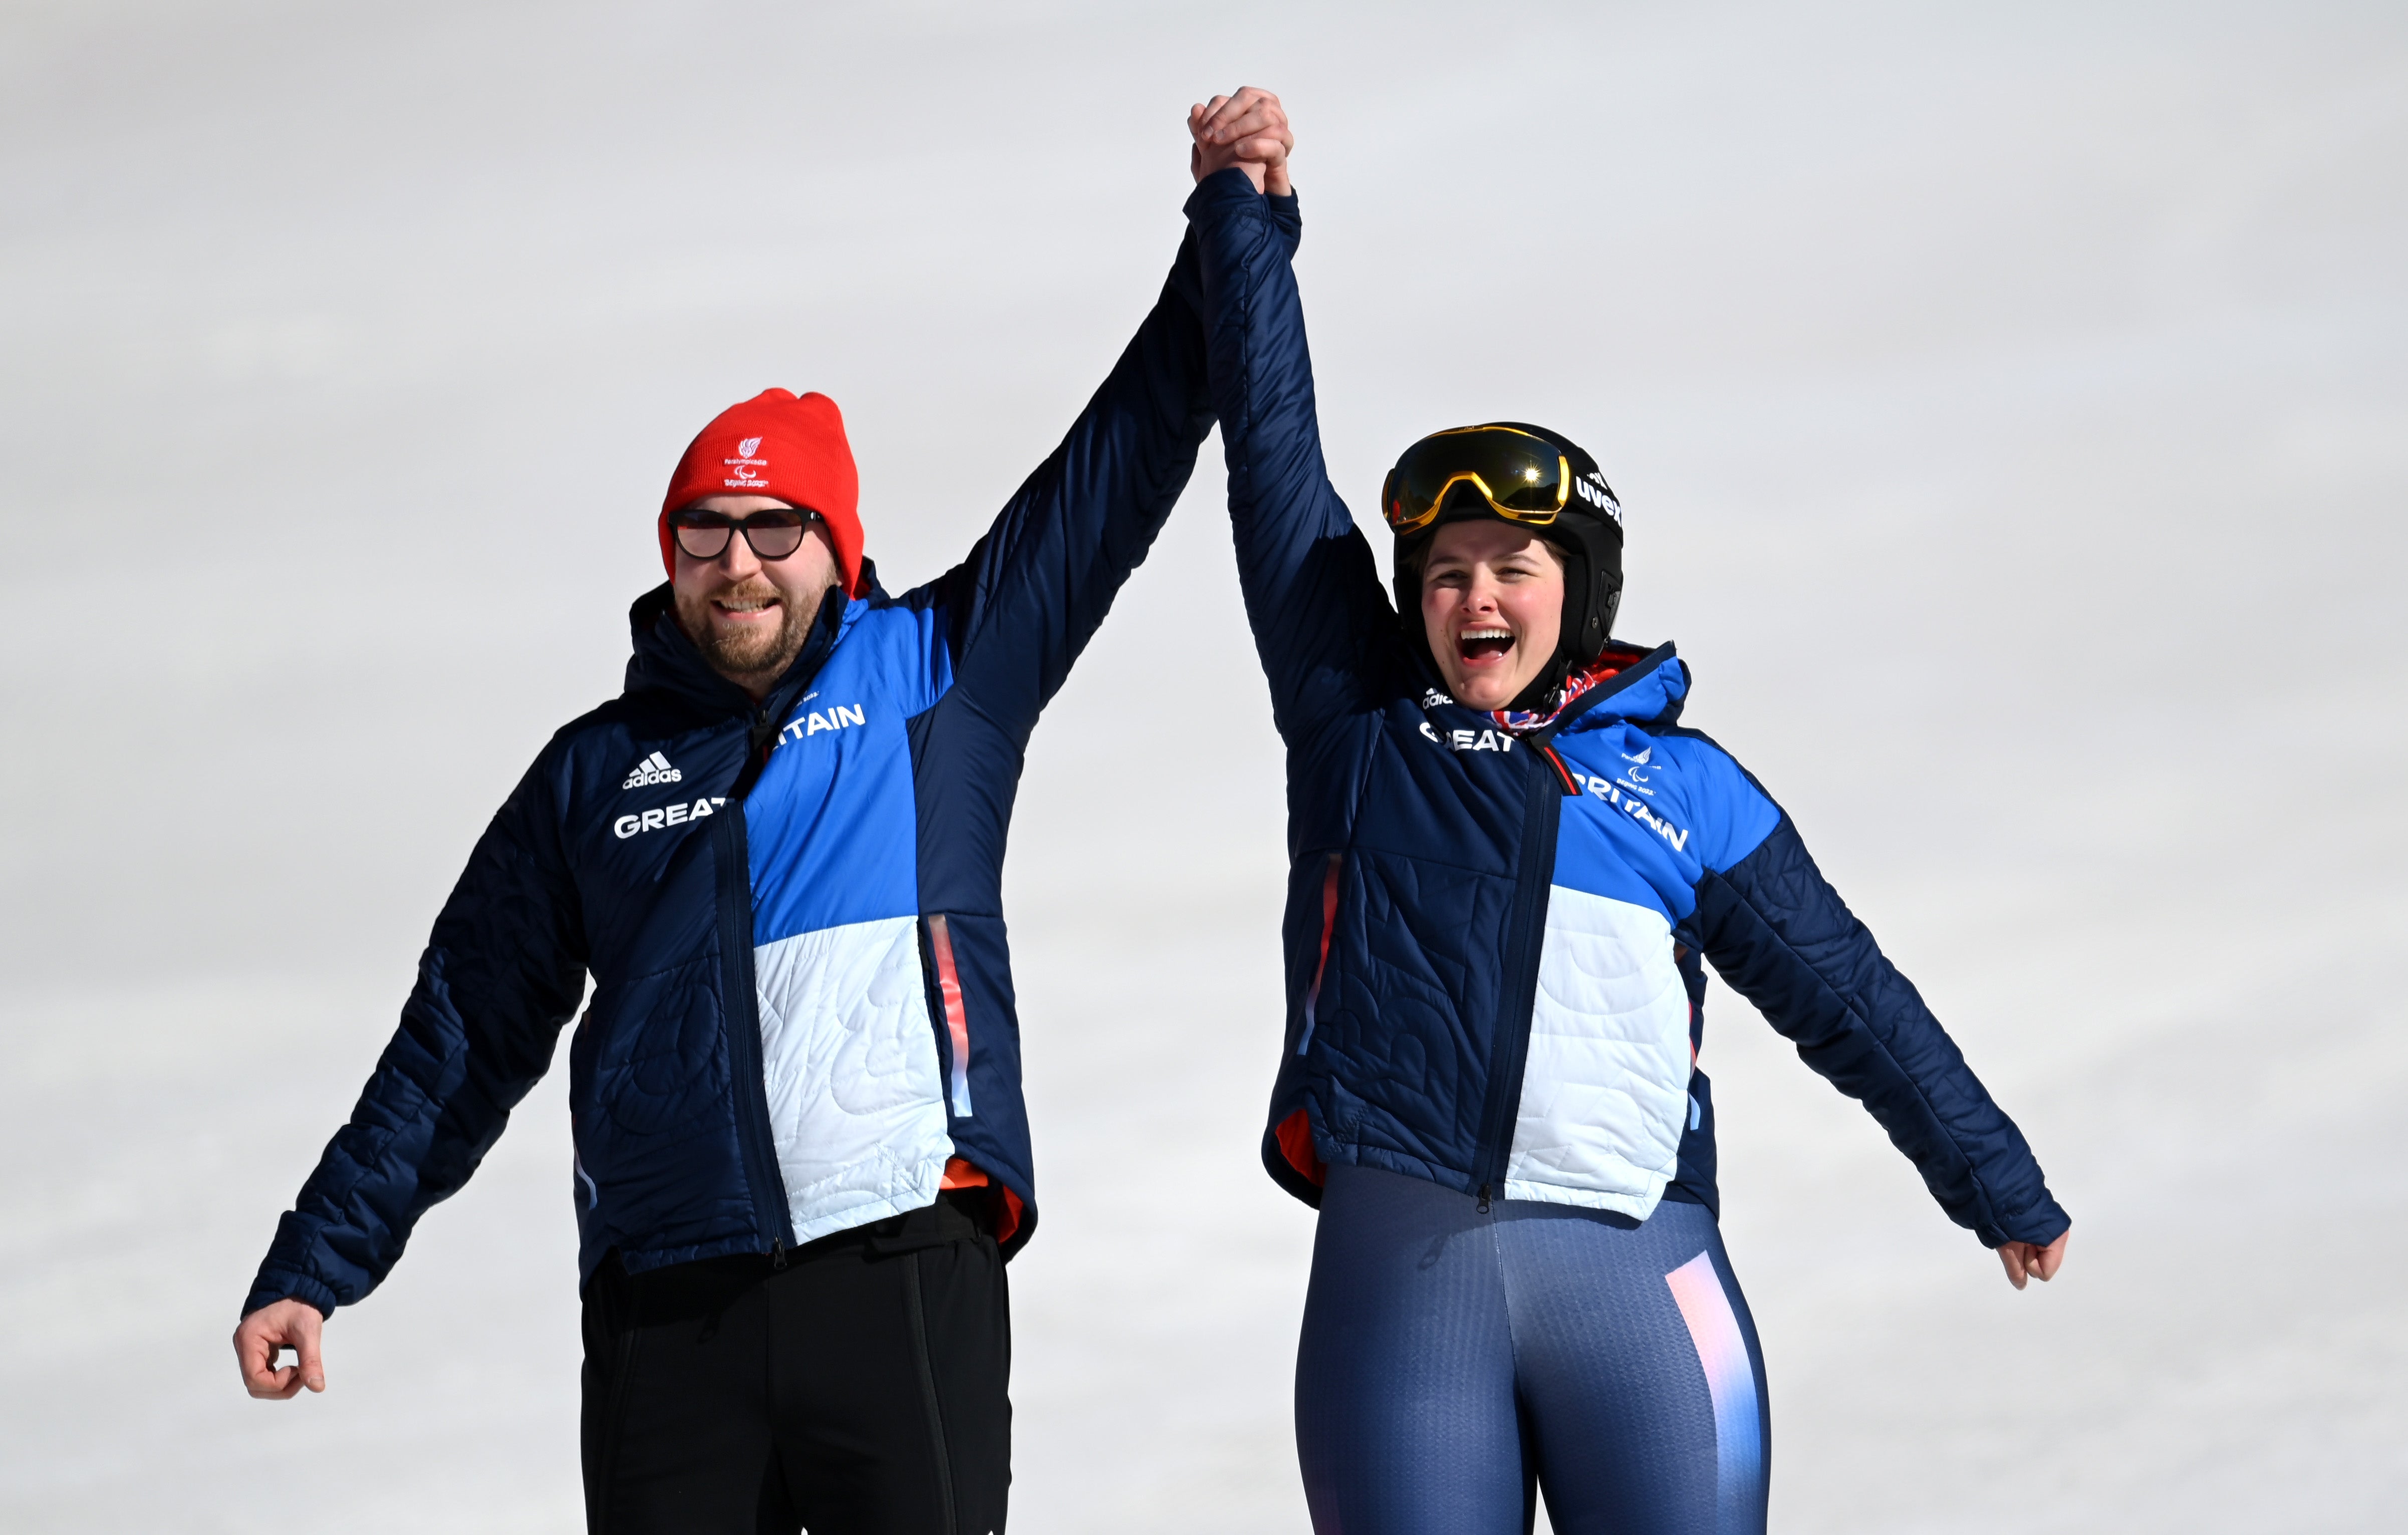 Millie Knight had won a bronze medal on day one of the 2022 Winter Paralympics